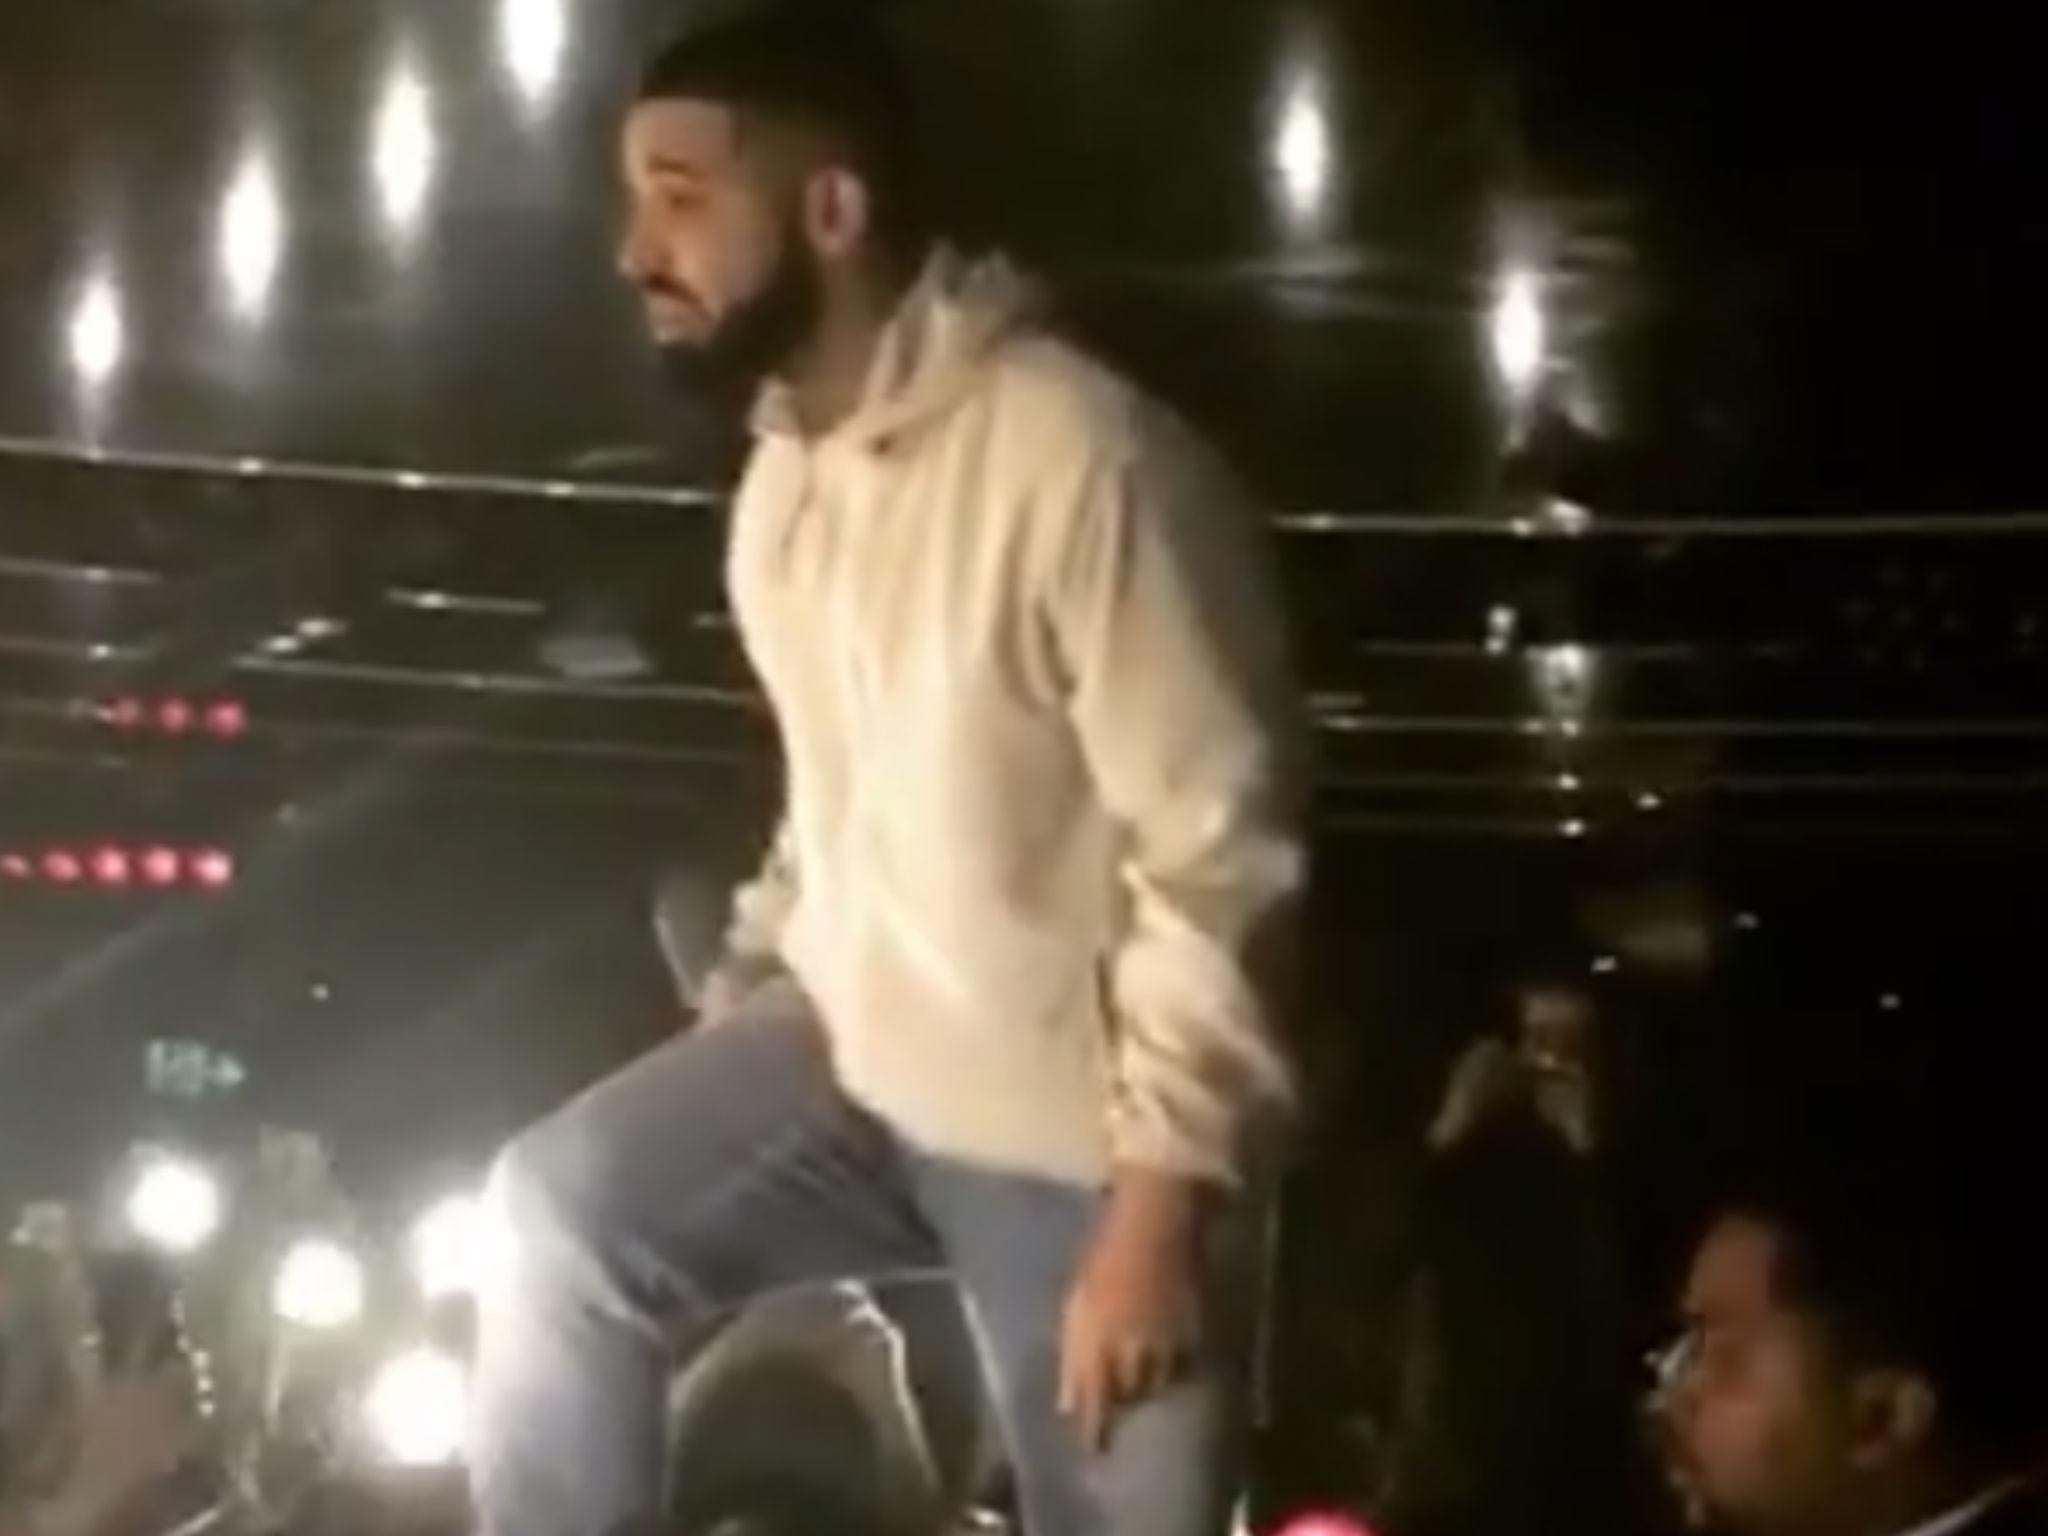 Drake publicly shamed a fan for groping women in the audience